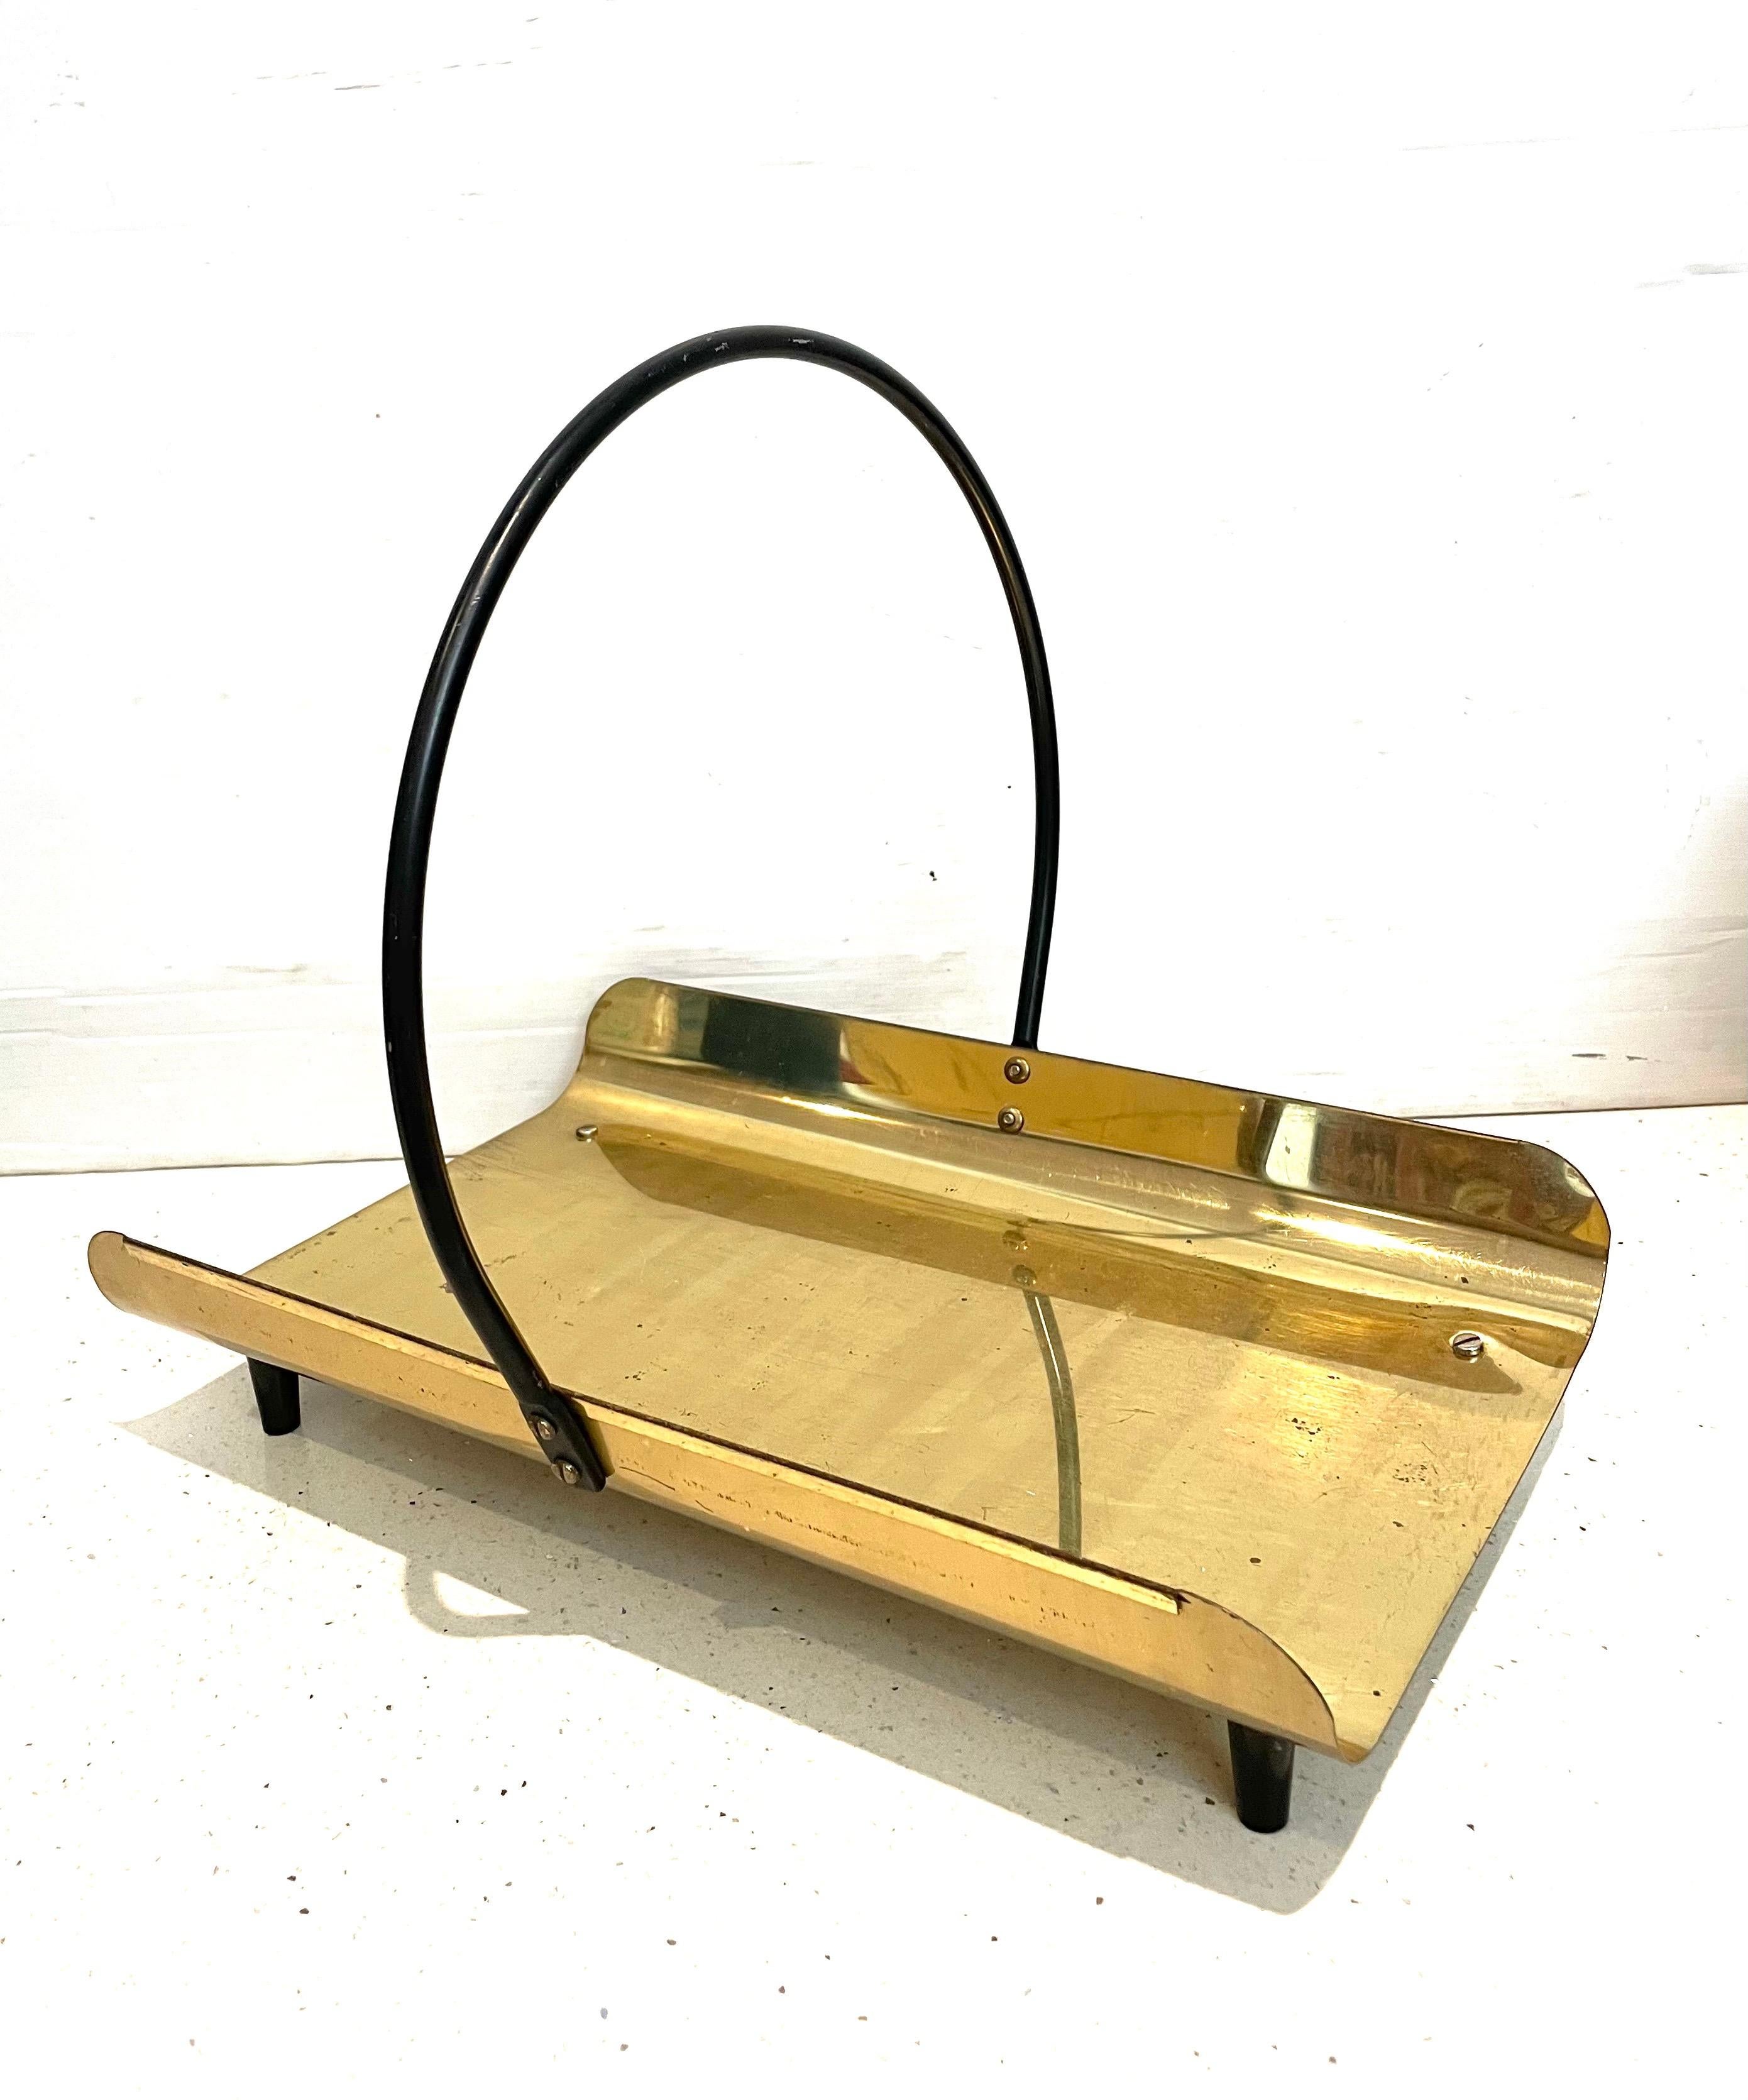 Elegant solid brass molded with iron handle and small tapered plastic feet magazine log holder, circa 1950s.